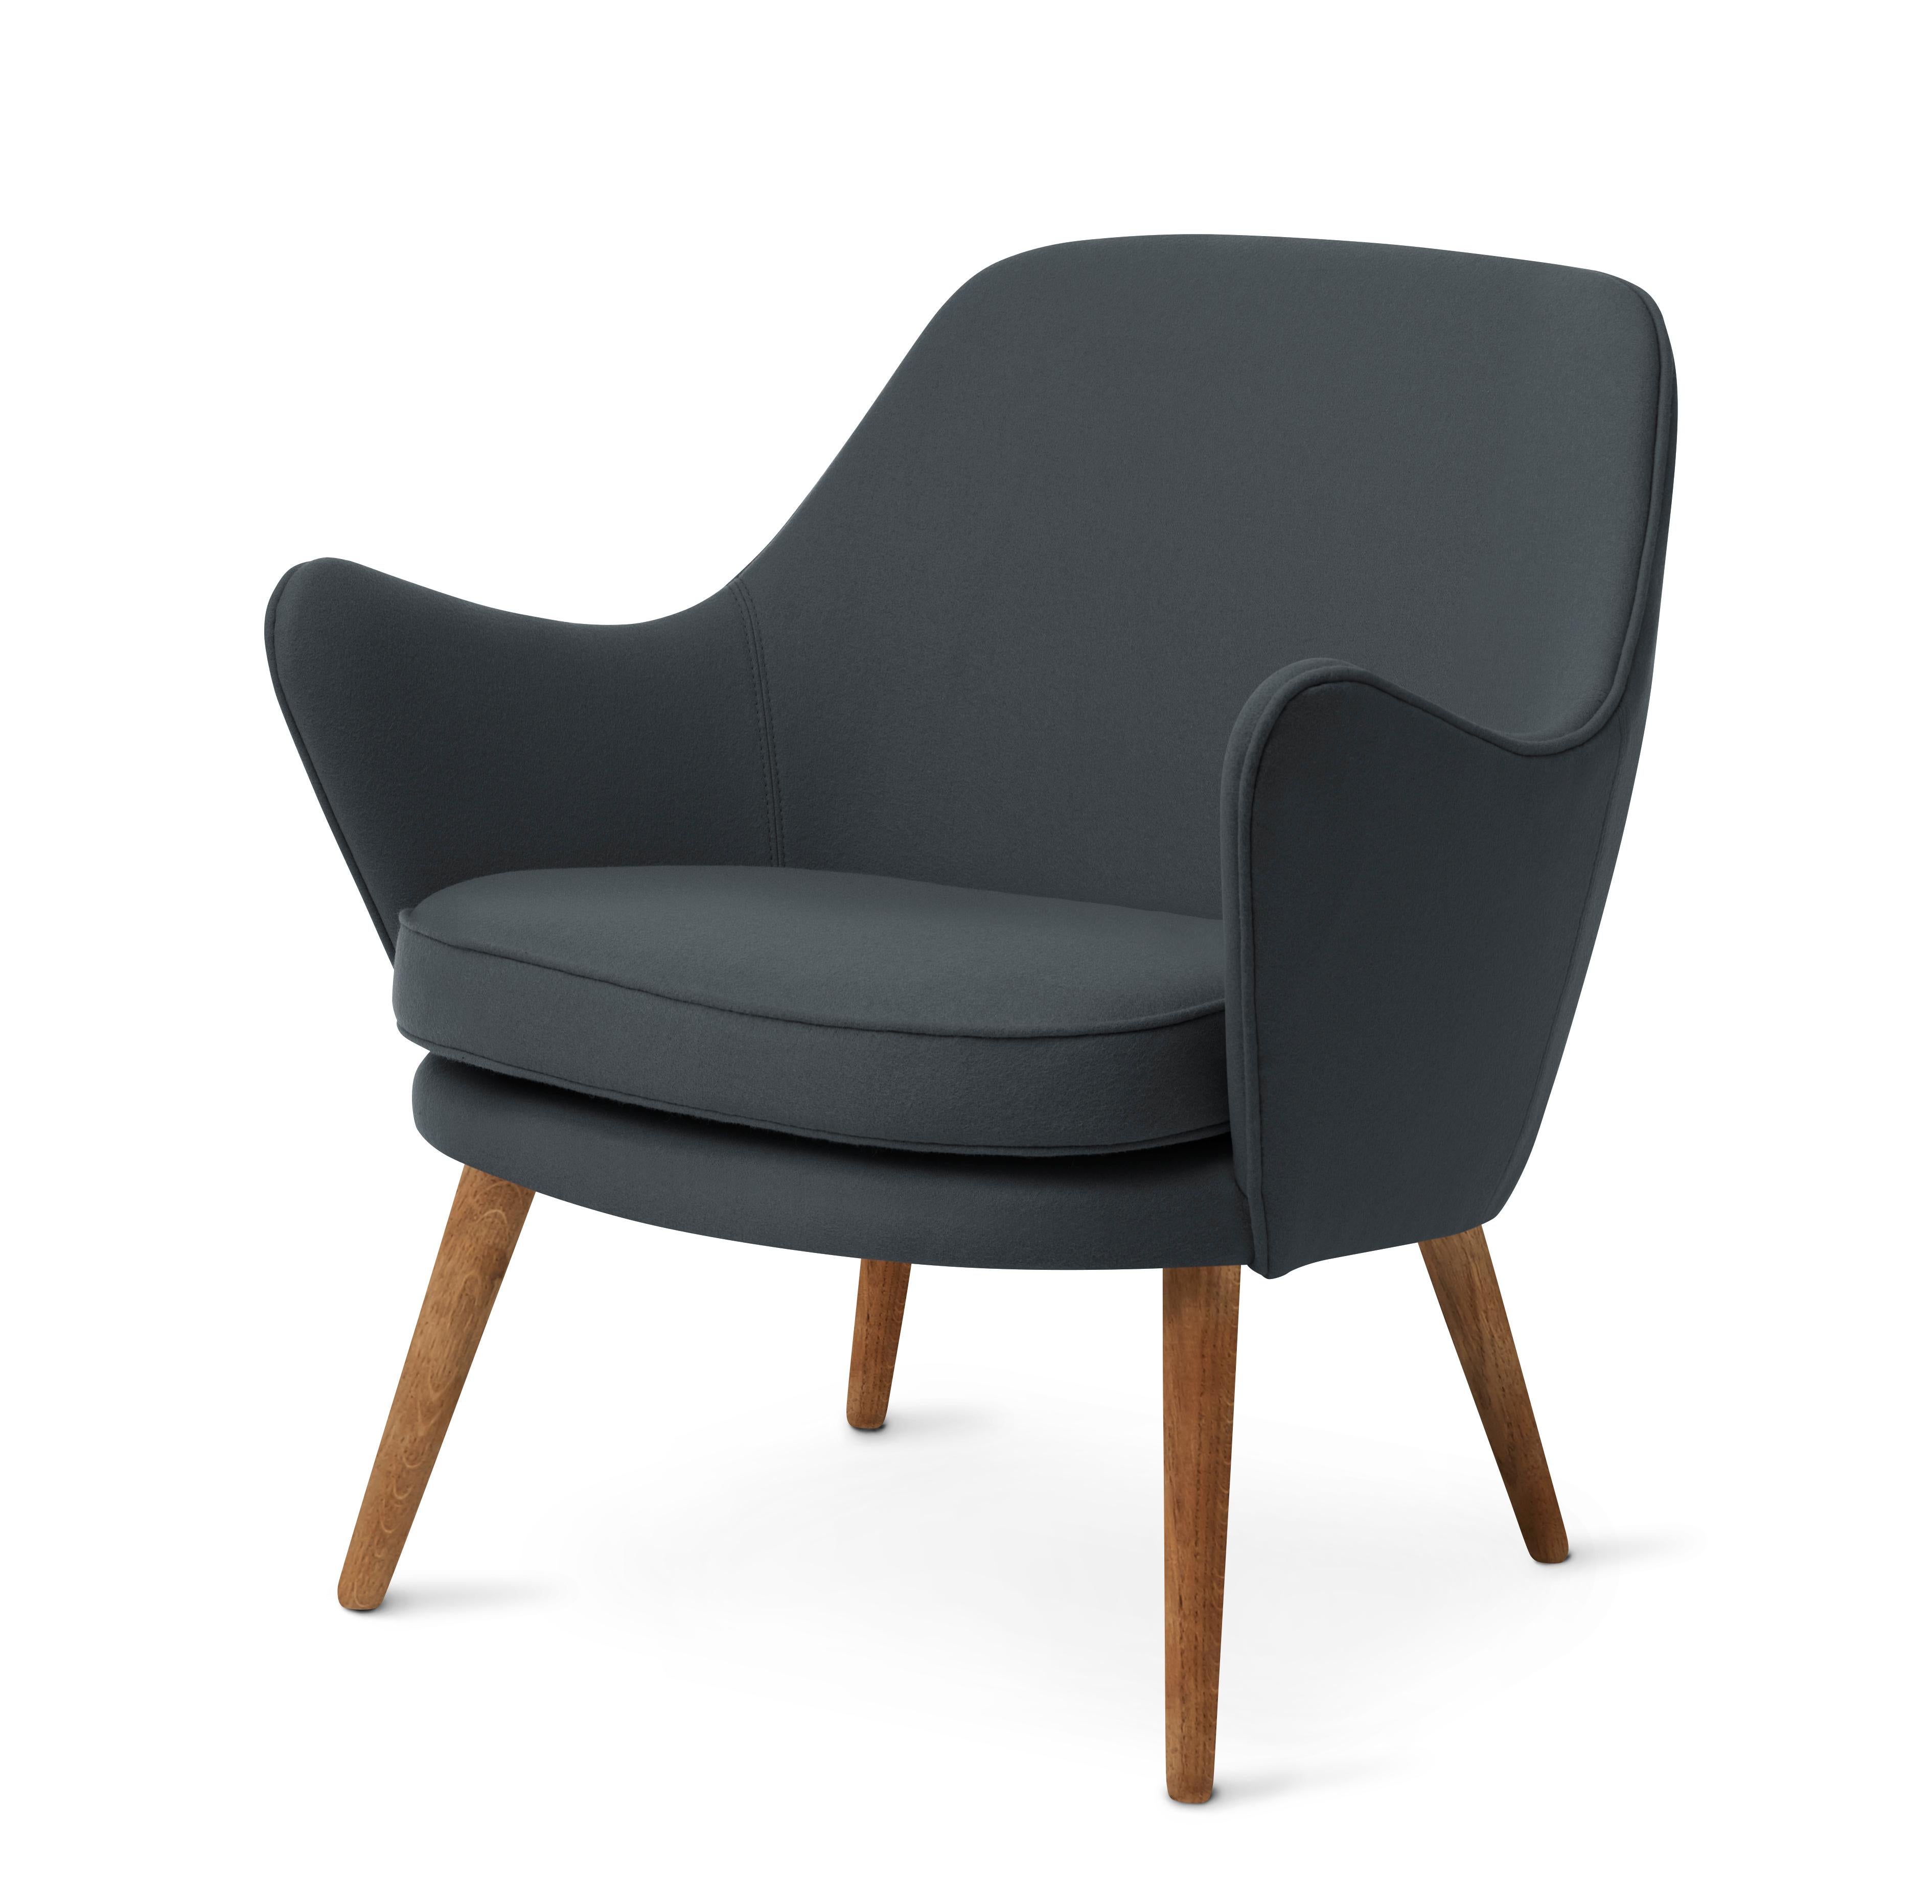 For Sale: Blue (Hero 991) Dwell Lounge Chair, by Hans Olsen from Warm Nordic 2